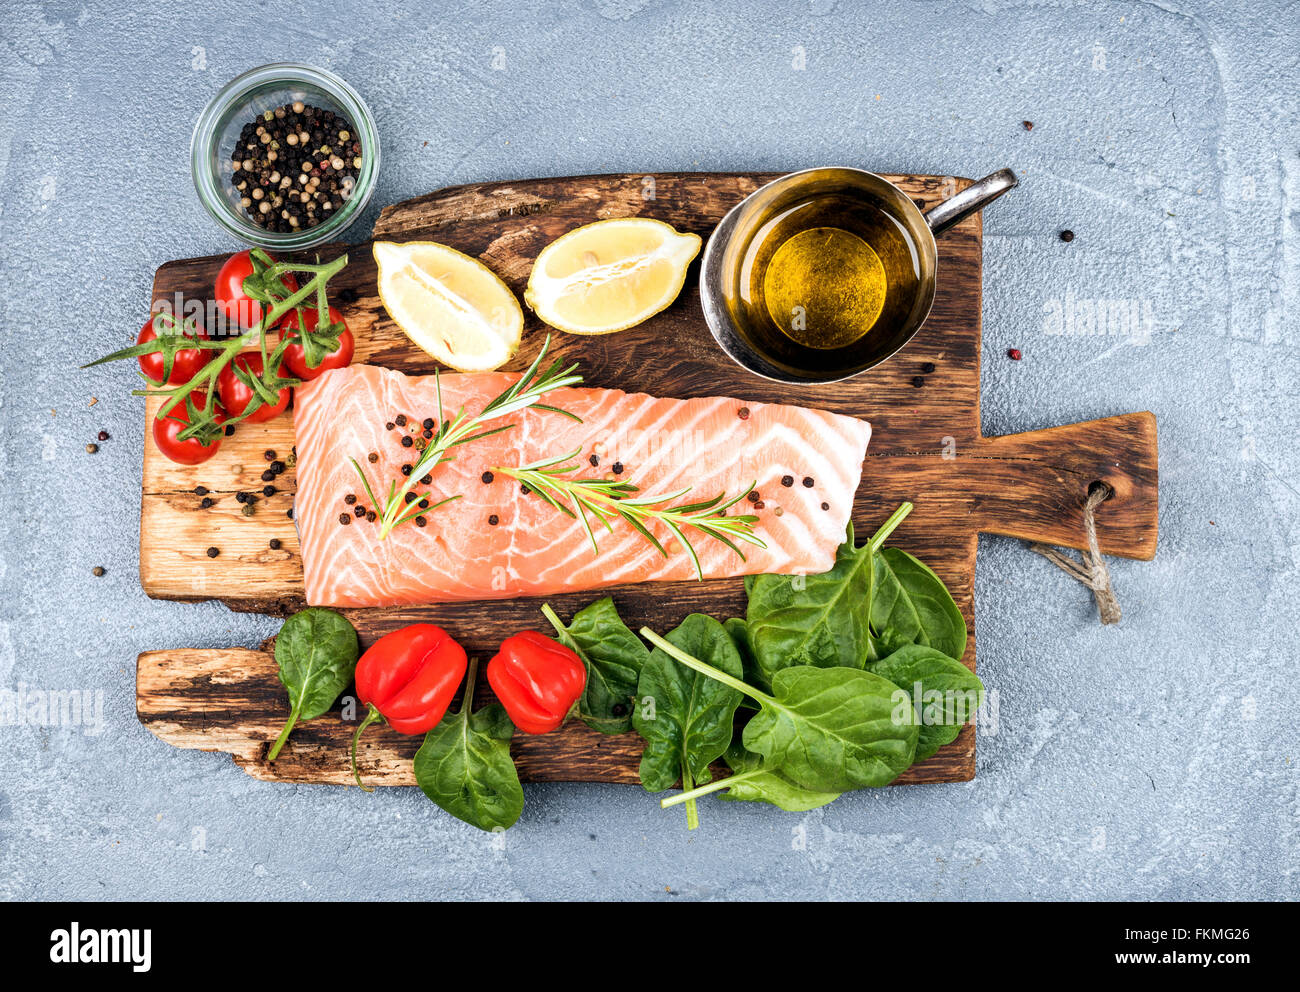 Ingredients for cooking healthy dinner. Raw salmon fillet, spinach, tomatoes, olive oil, lemon, peppers, rosemary and spices on Stock Photo